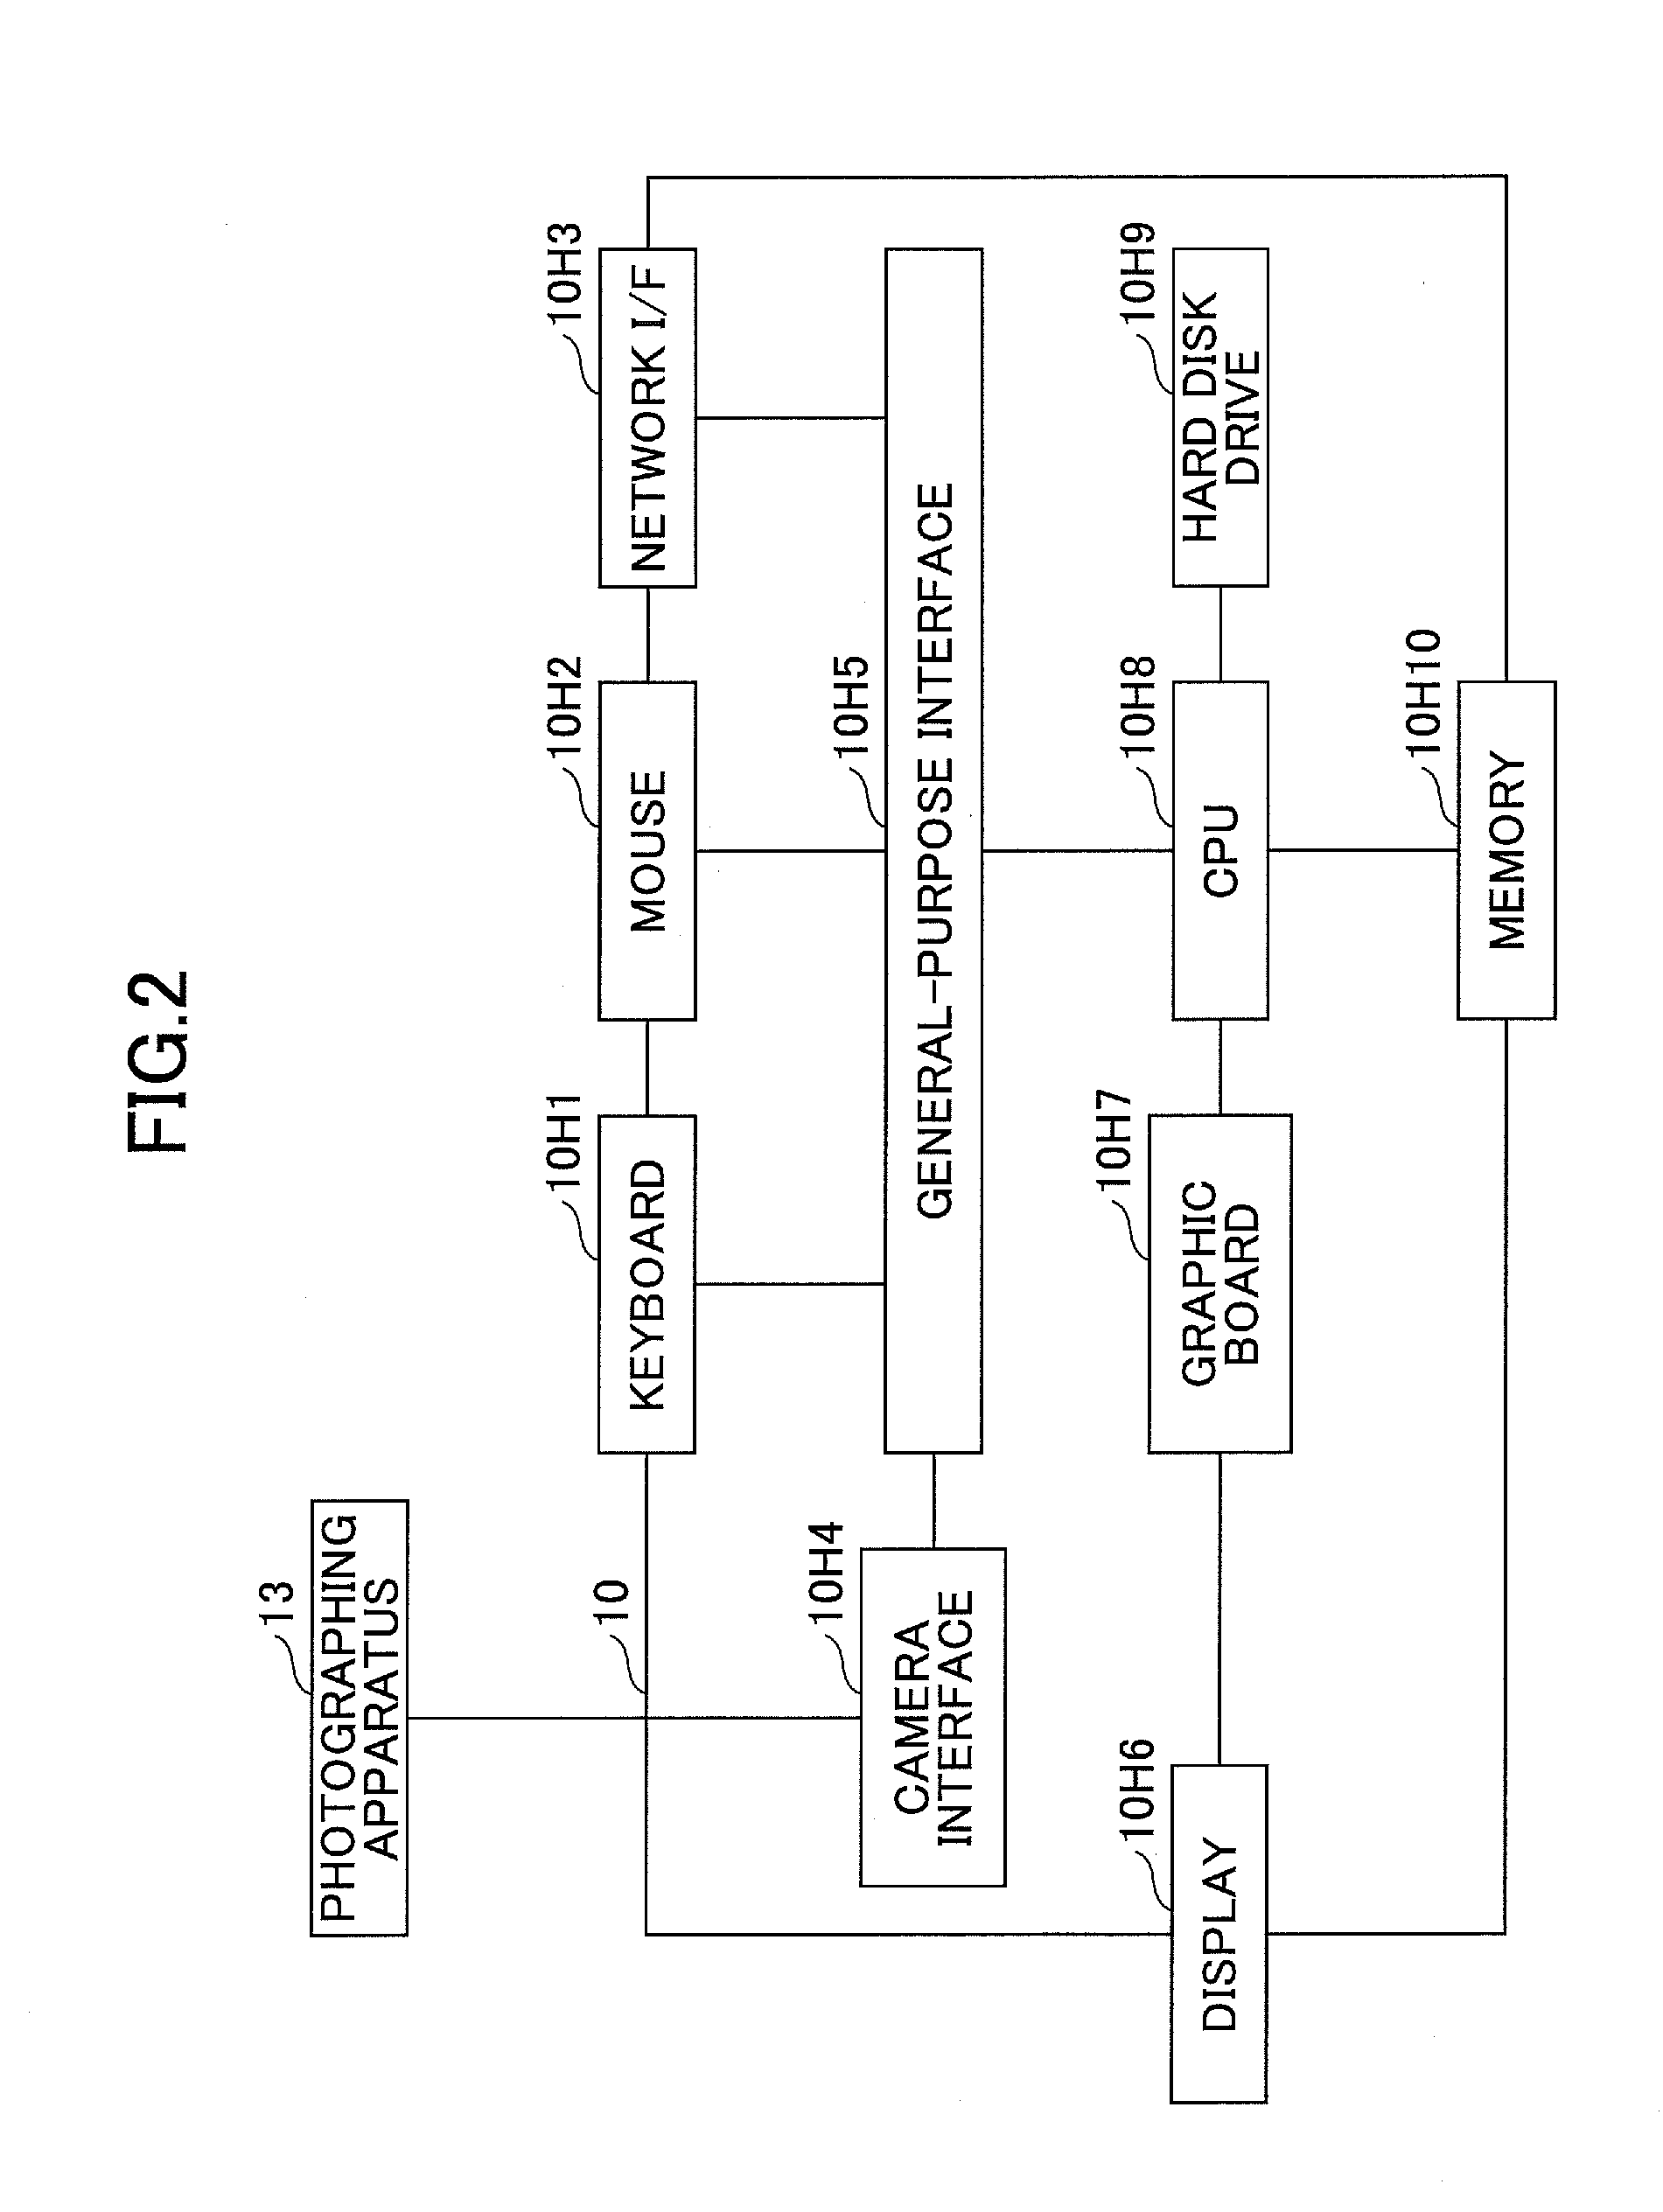 Defect inspection apparatus for inspecting sheet-like inspection object, computer-implemented method for inspecting sheet-like inspection object, and defect inspection system for inspecting sheet-like inspection object